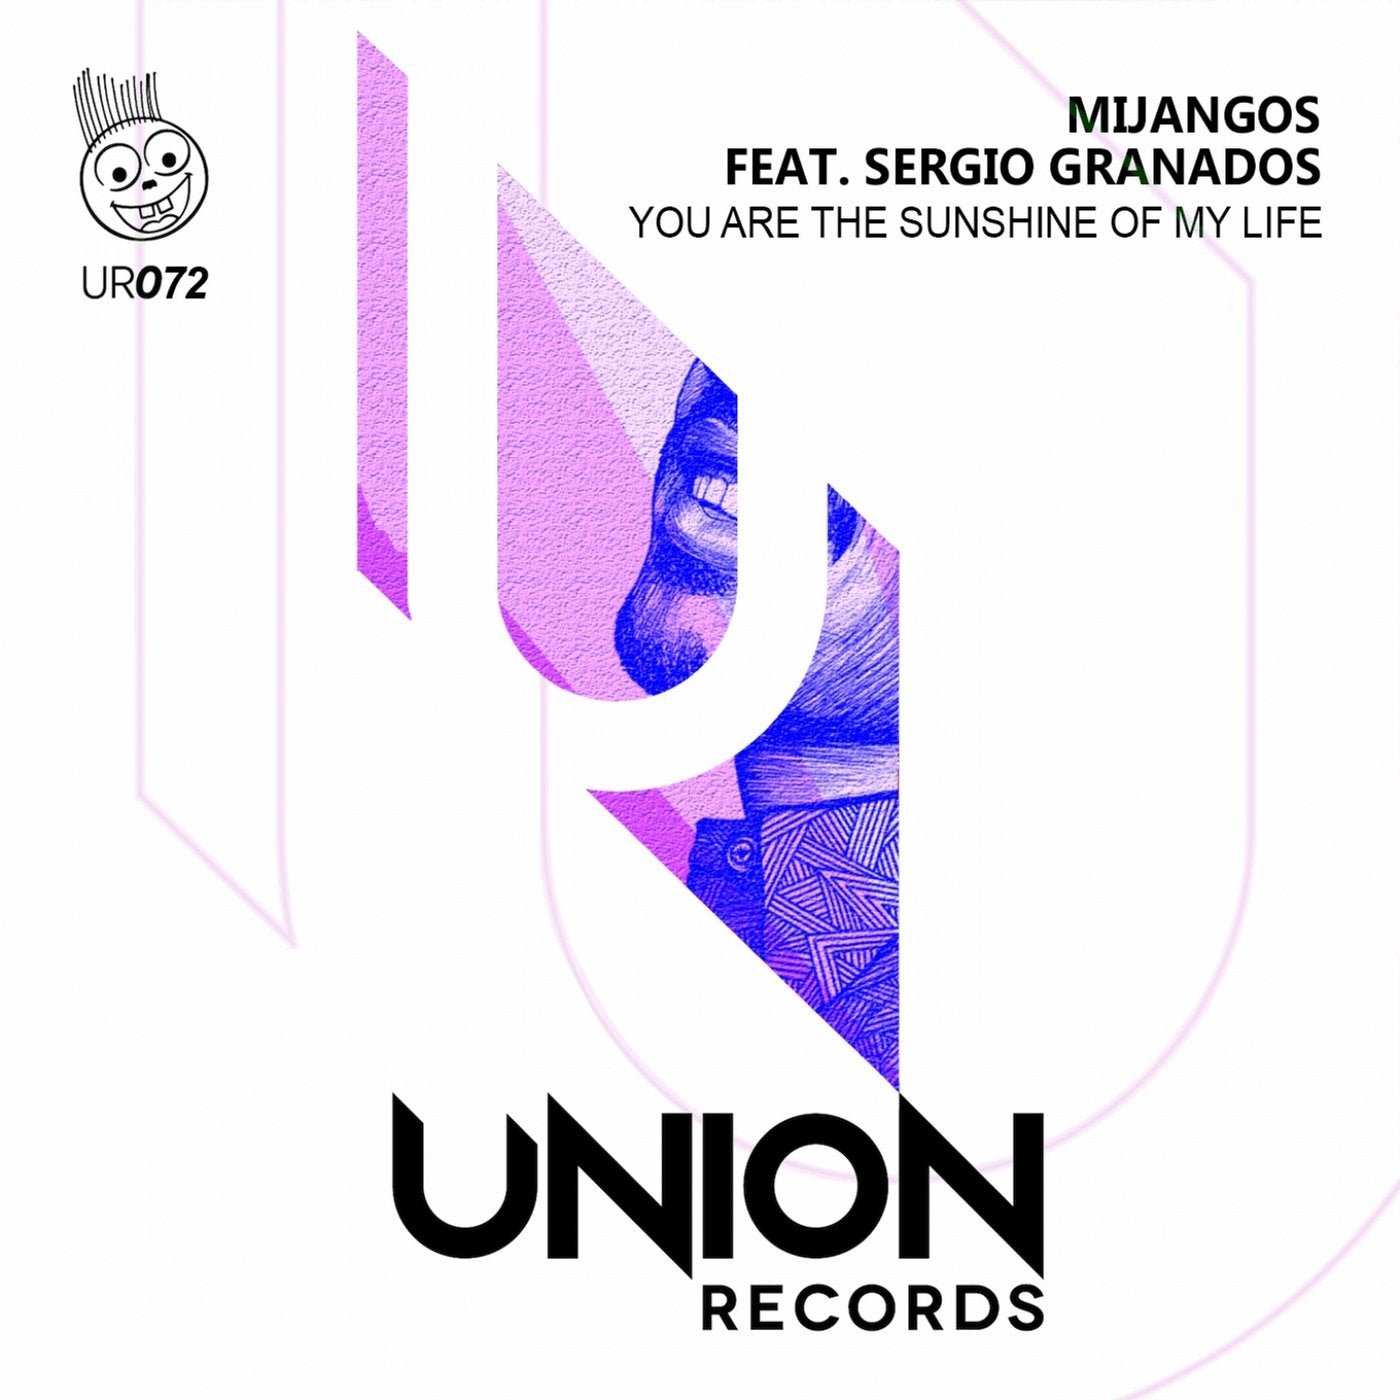 You Are the Sunshine of My Life (feat. Sergio Granados)